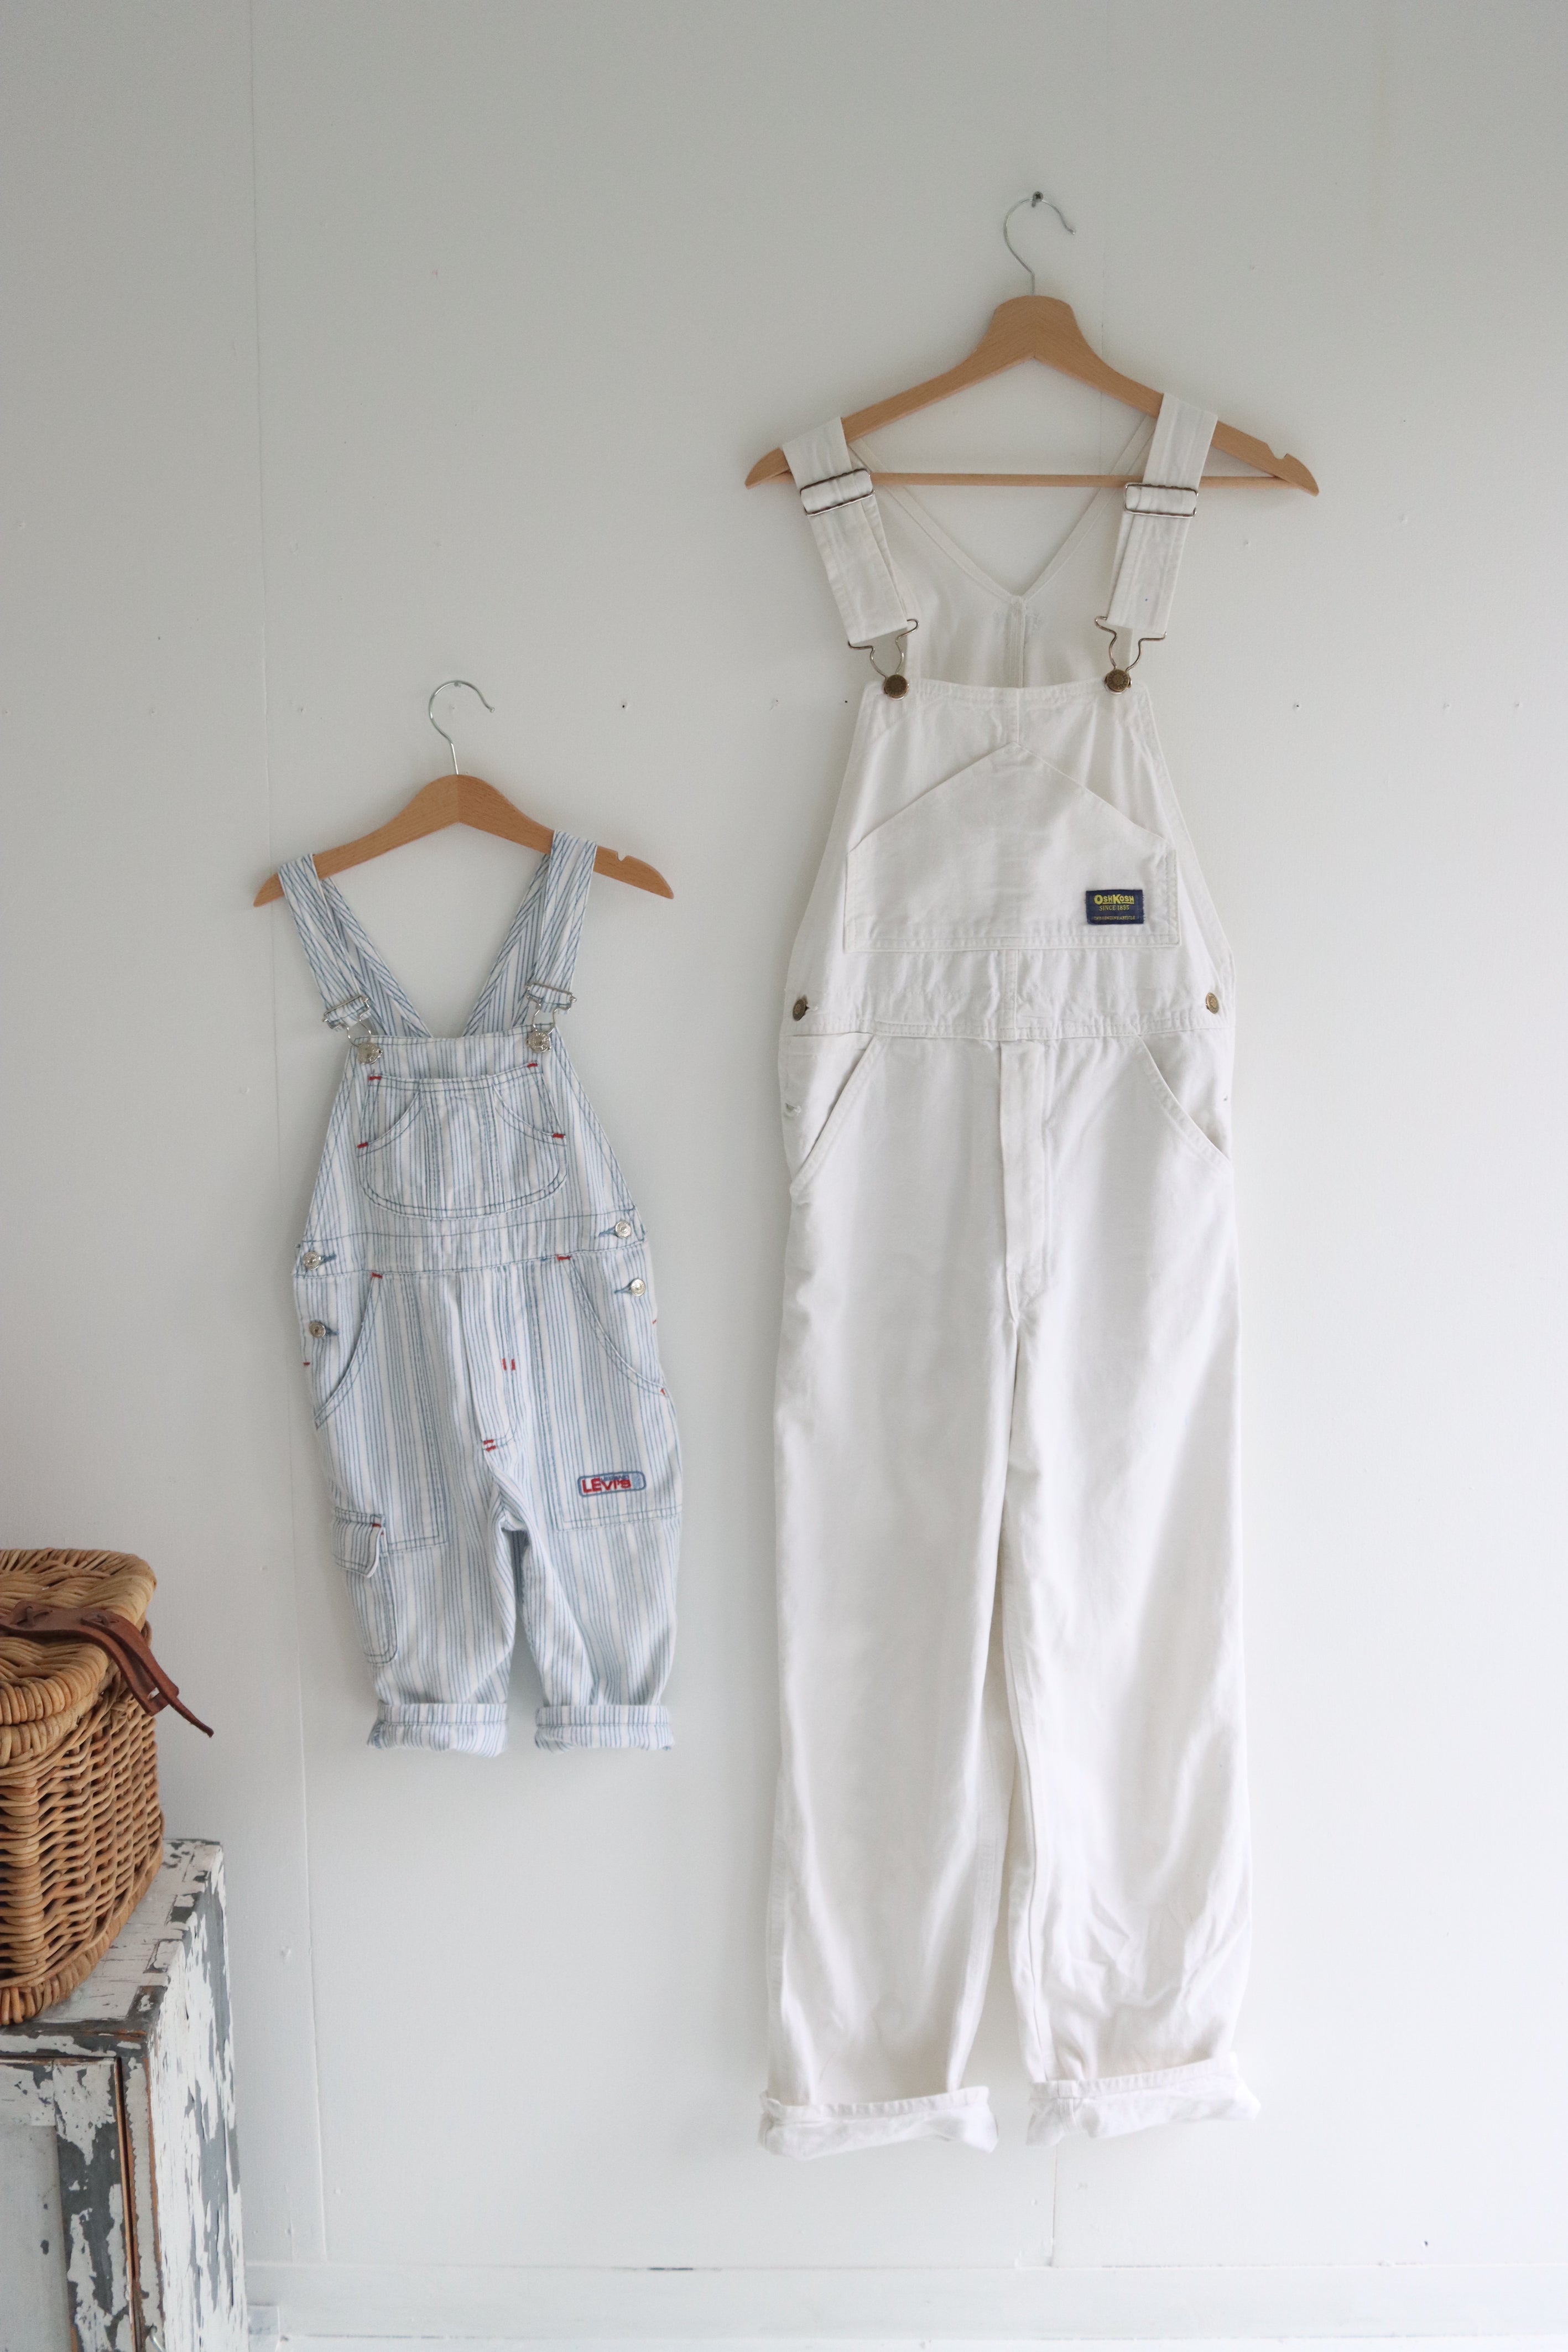 Vintage white canvas painter OshKosh overalls (adult)  - Size S/M - made in USA